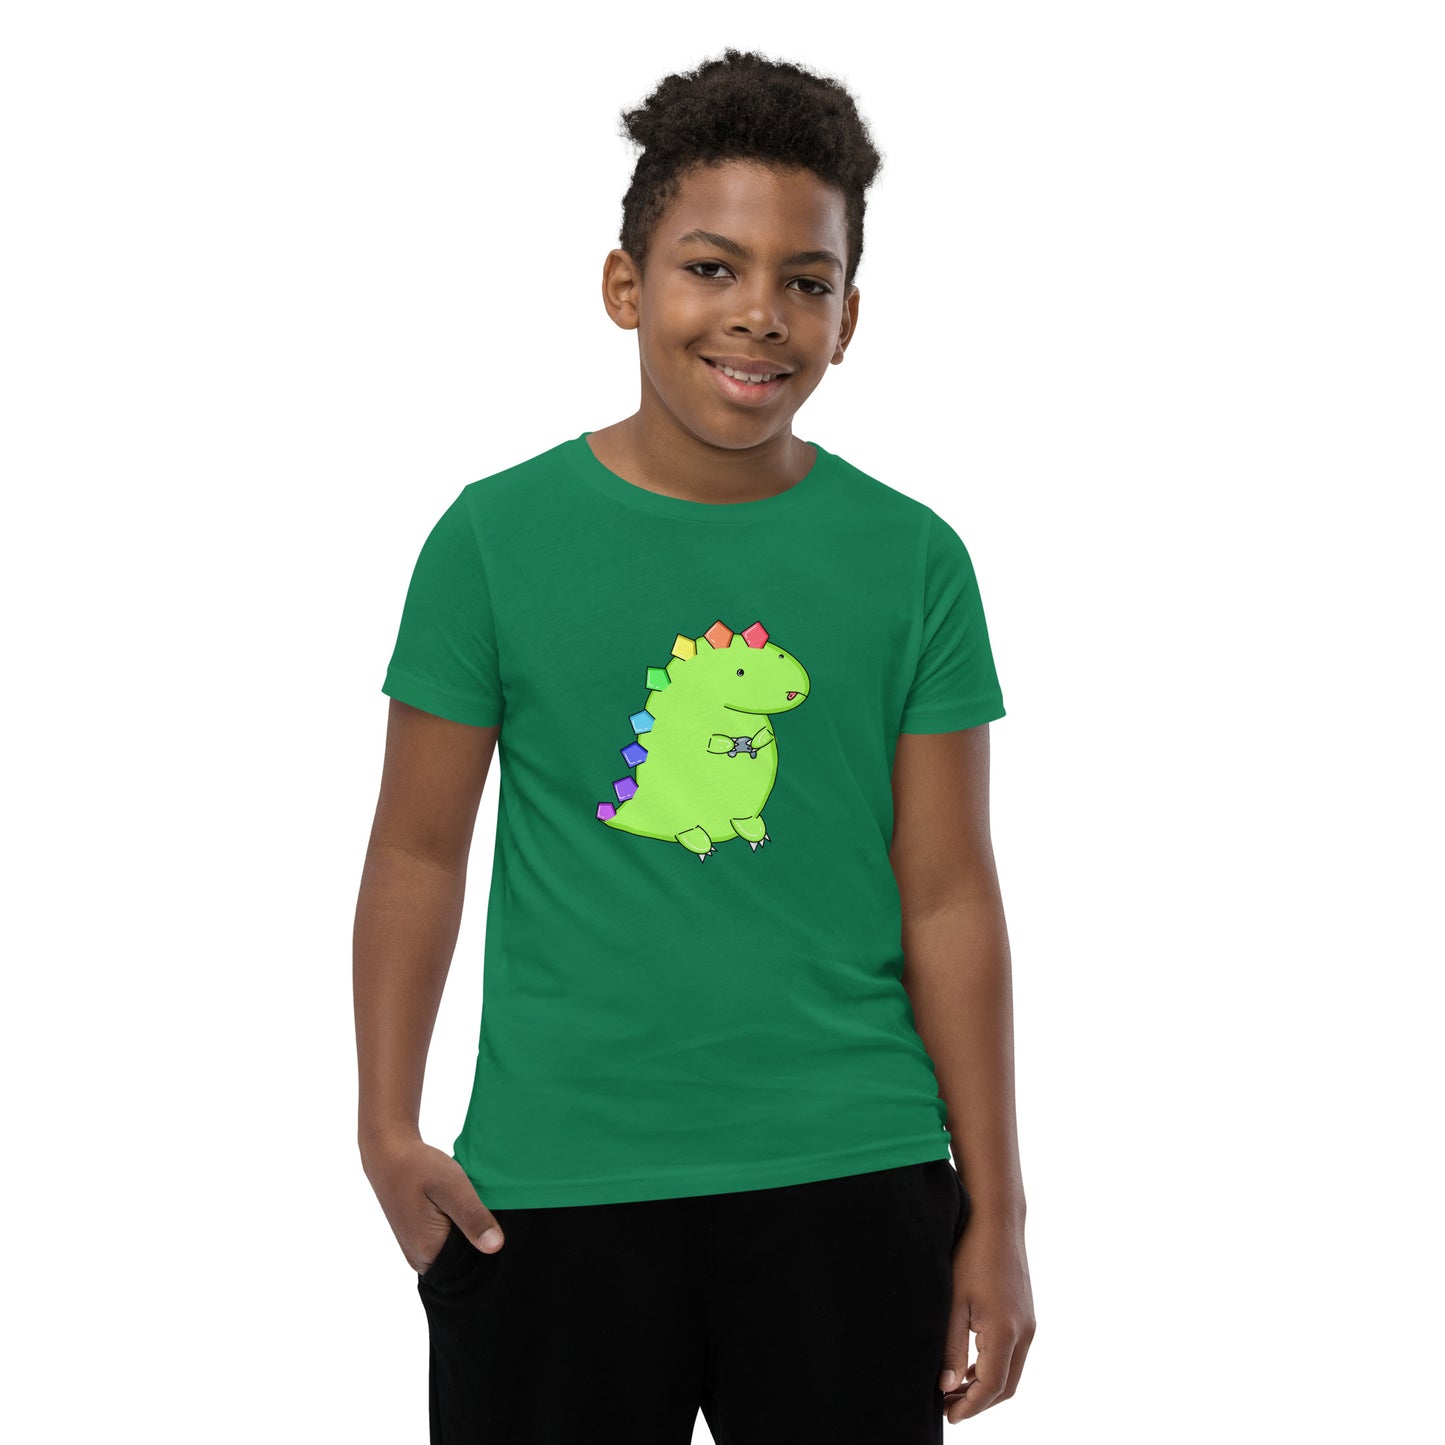 Gaming Dino Tee - YOUTH SIZES - Multiple Colors - Designed Exclusively for Virtual Legality by the Littlest Hoegling